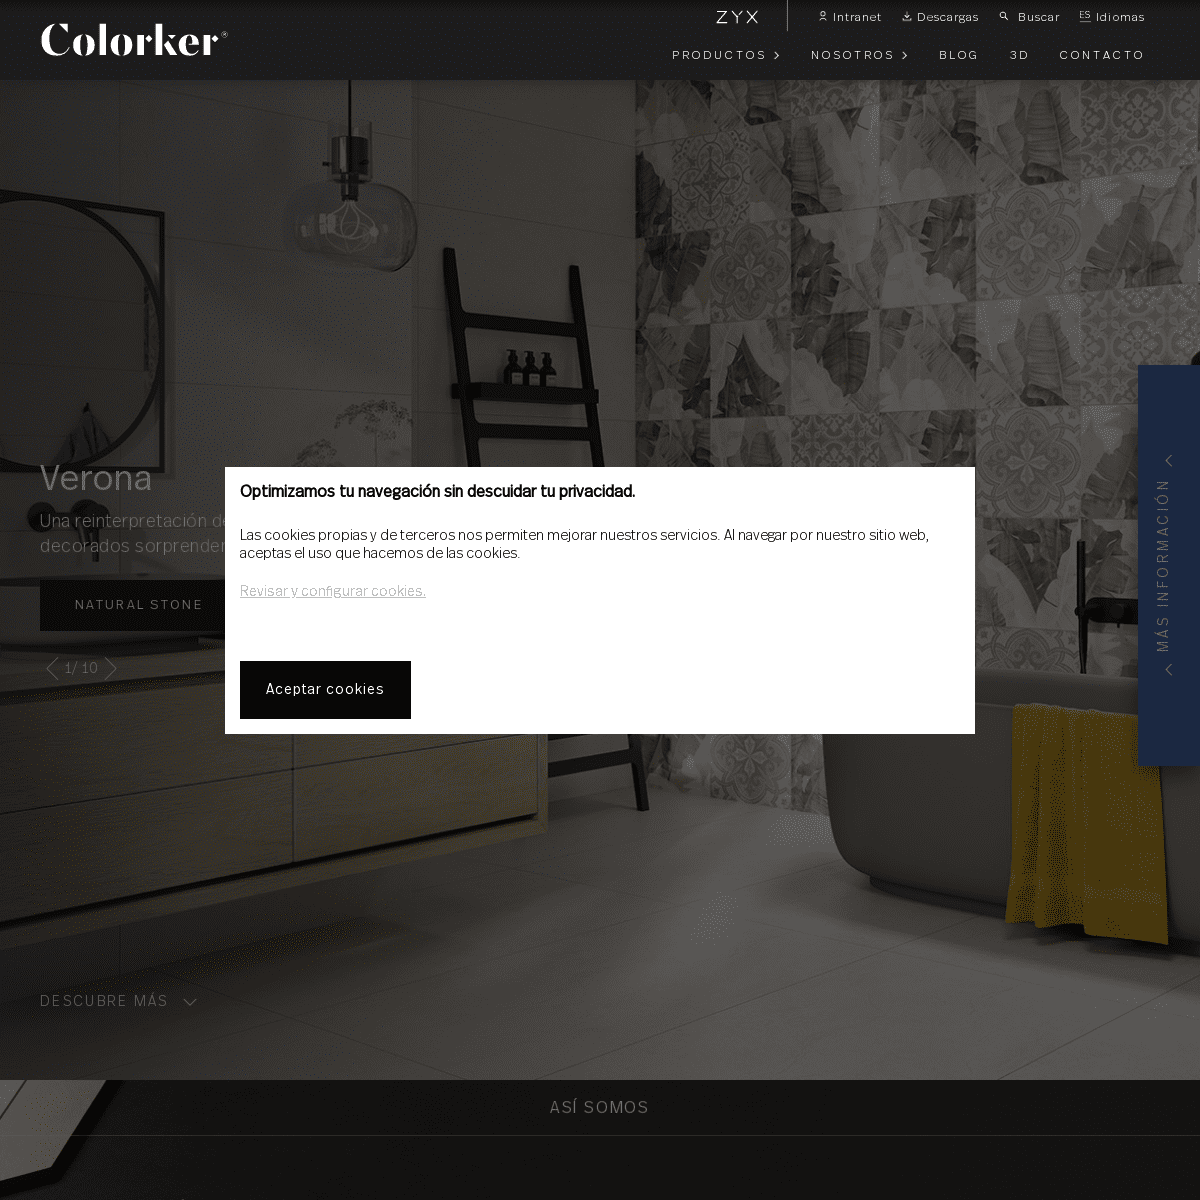 A complete backup of https://colorker.com